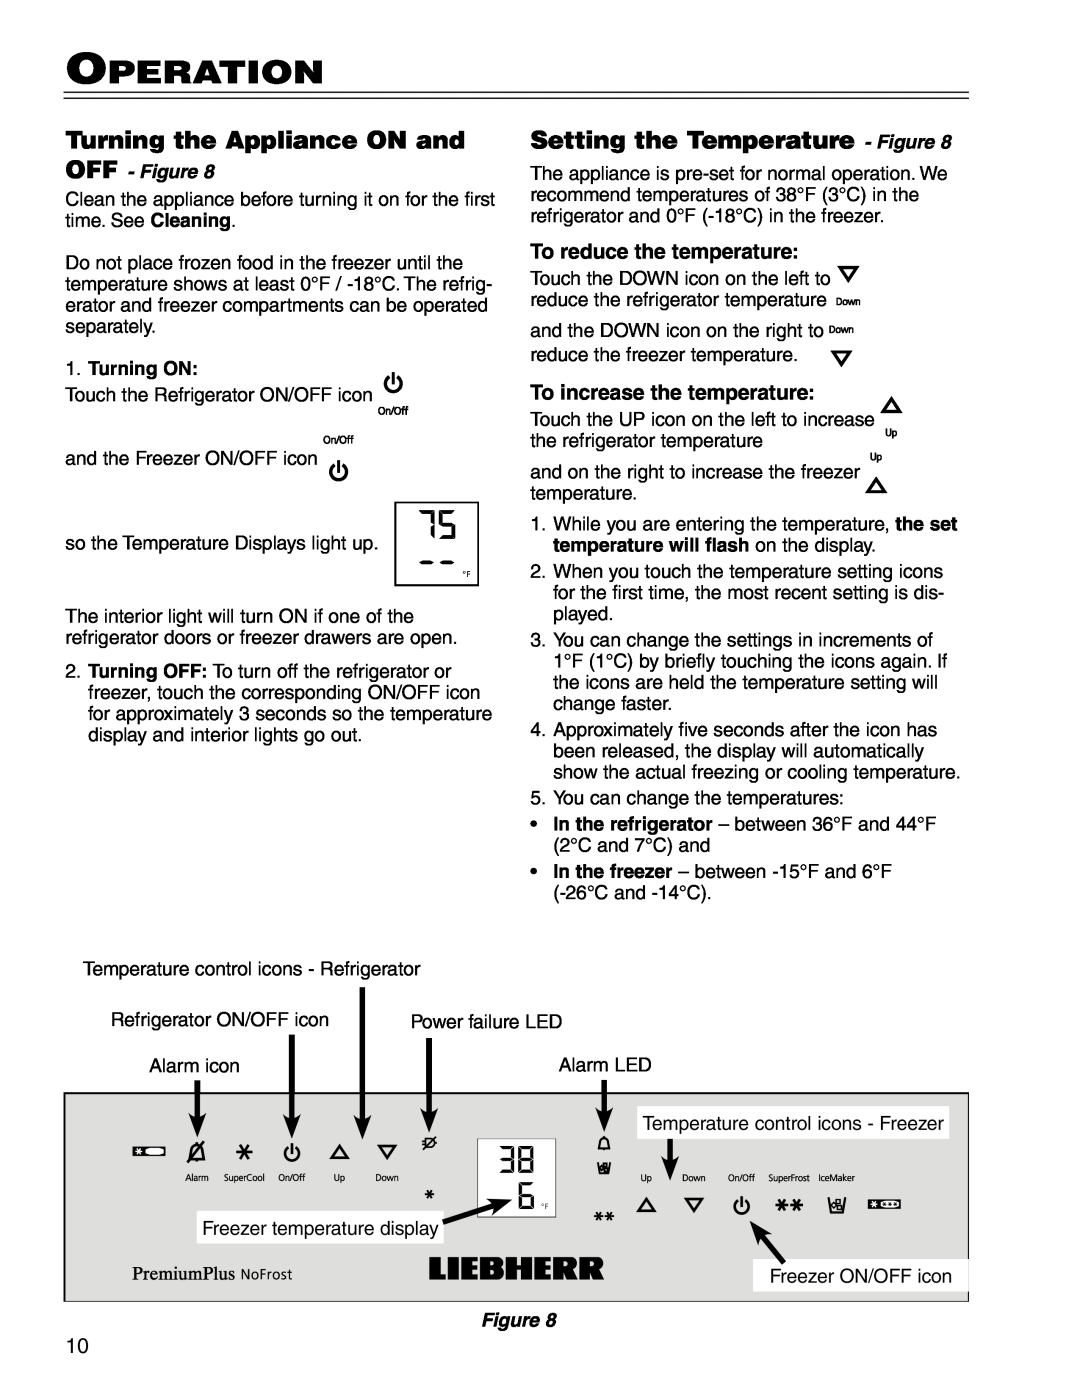 Liebherr HCS 7081411-00 manual Operation, Turning the Appliance ON and, Setting the Temperature - Figure, OFF - Figure 